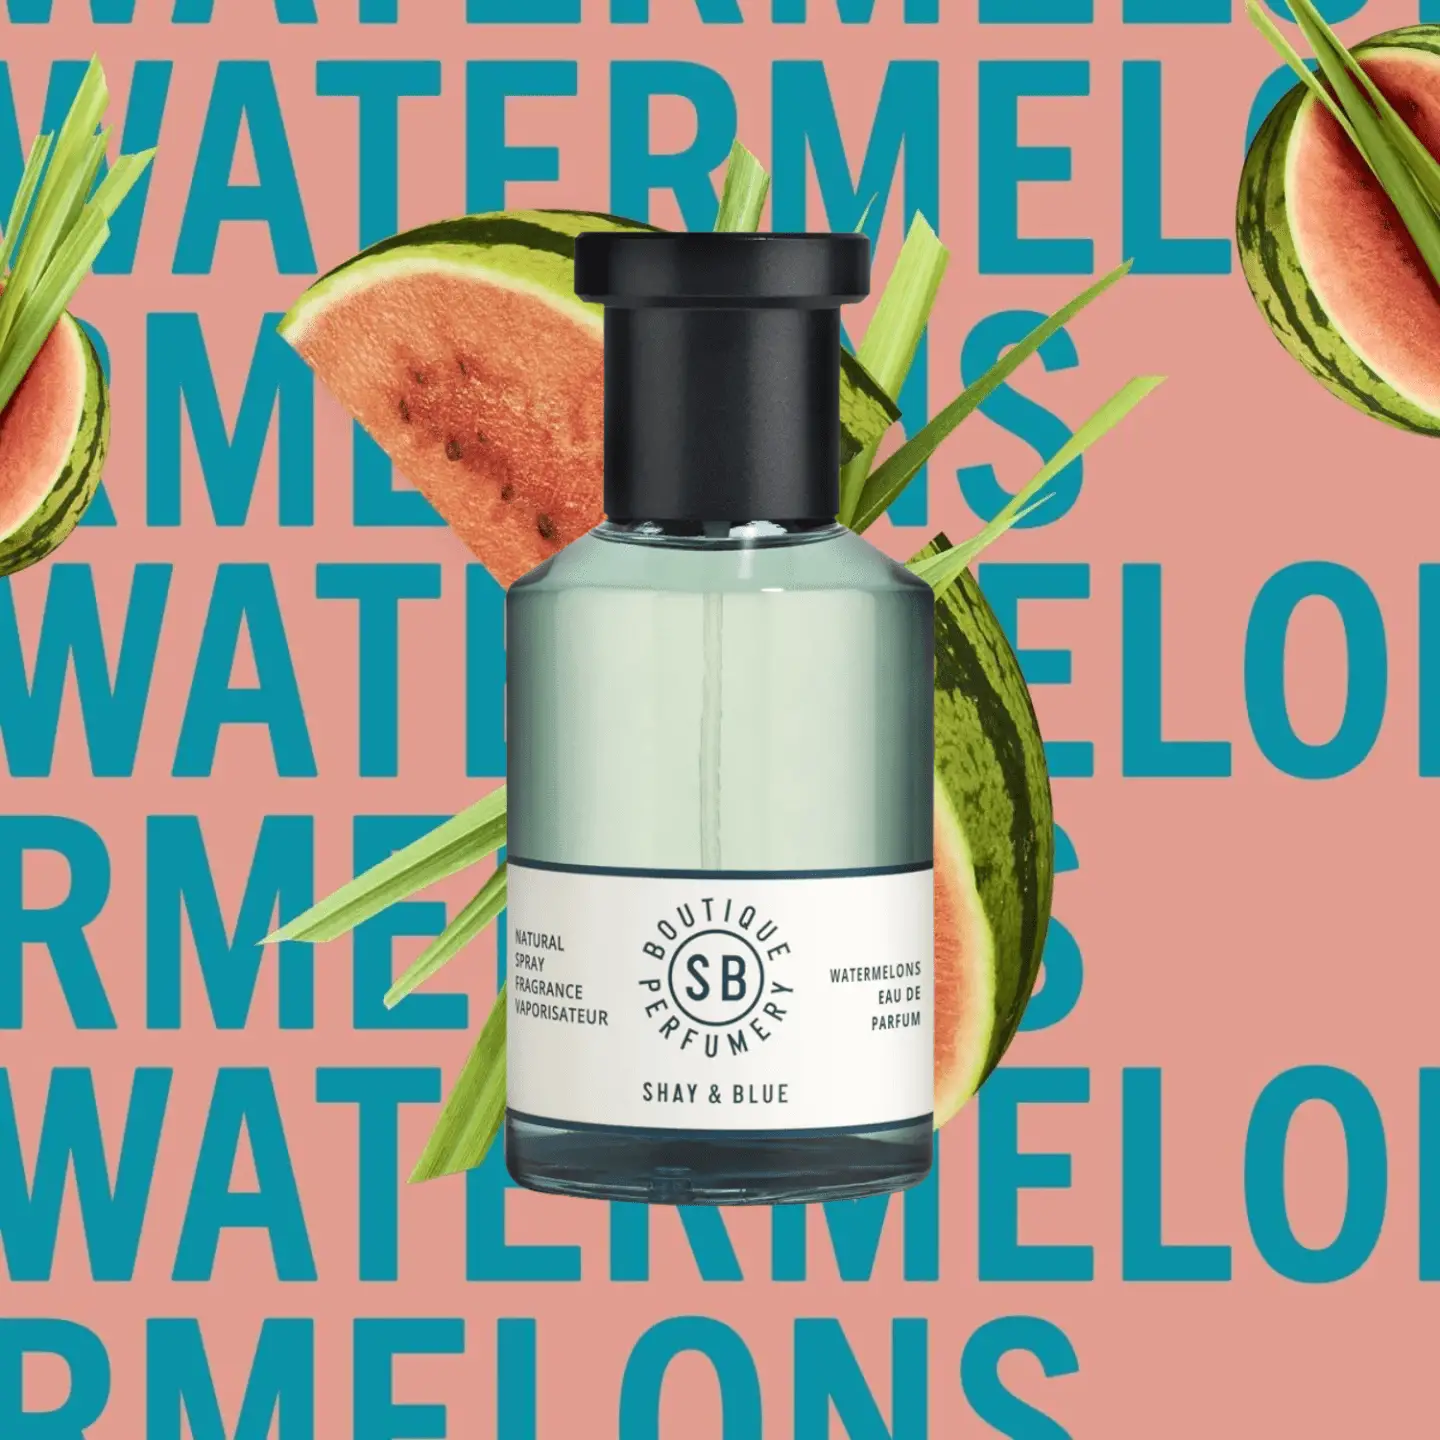 Shay & Blue Watermelons
Best Watermelon Perfumes